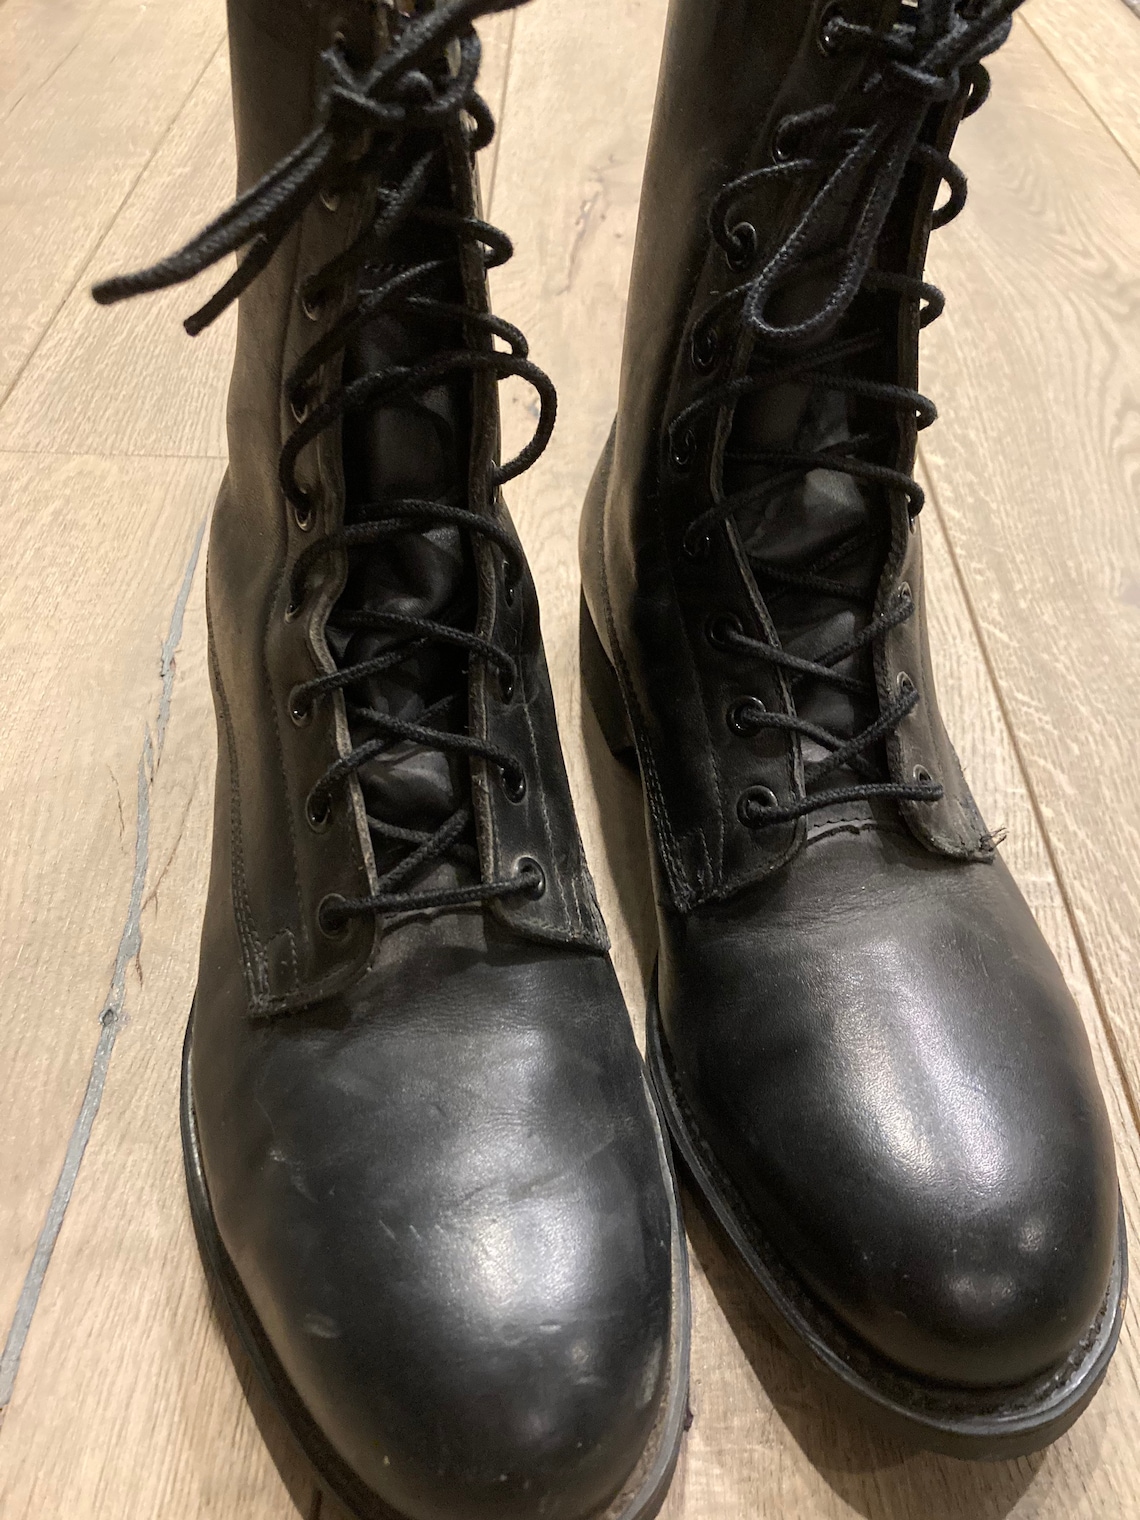 80s Addison Military Combat Boots 9 eye Lace up Issue leather | Etsy